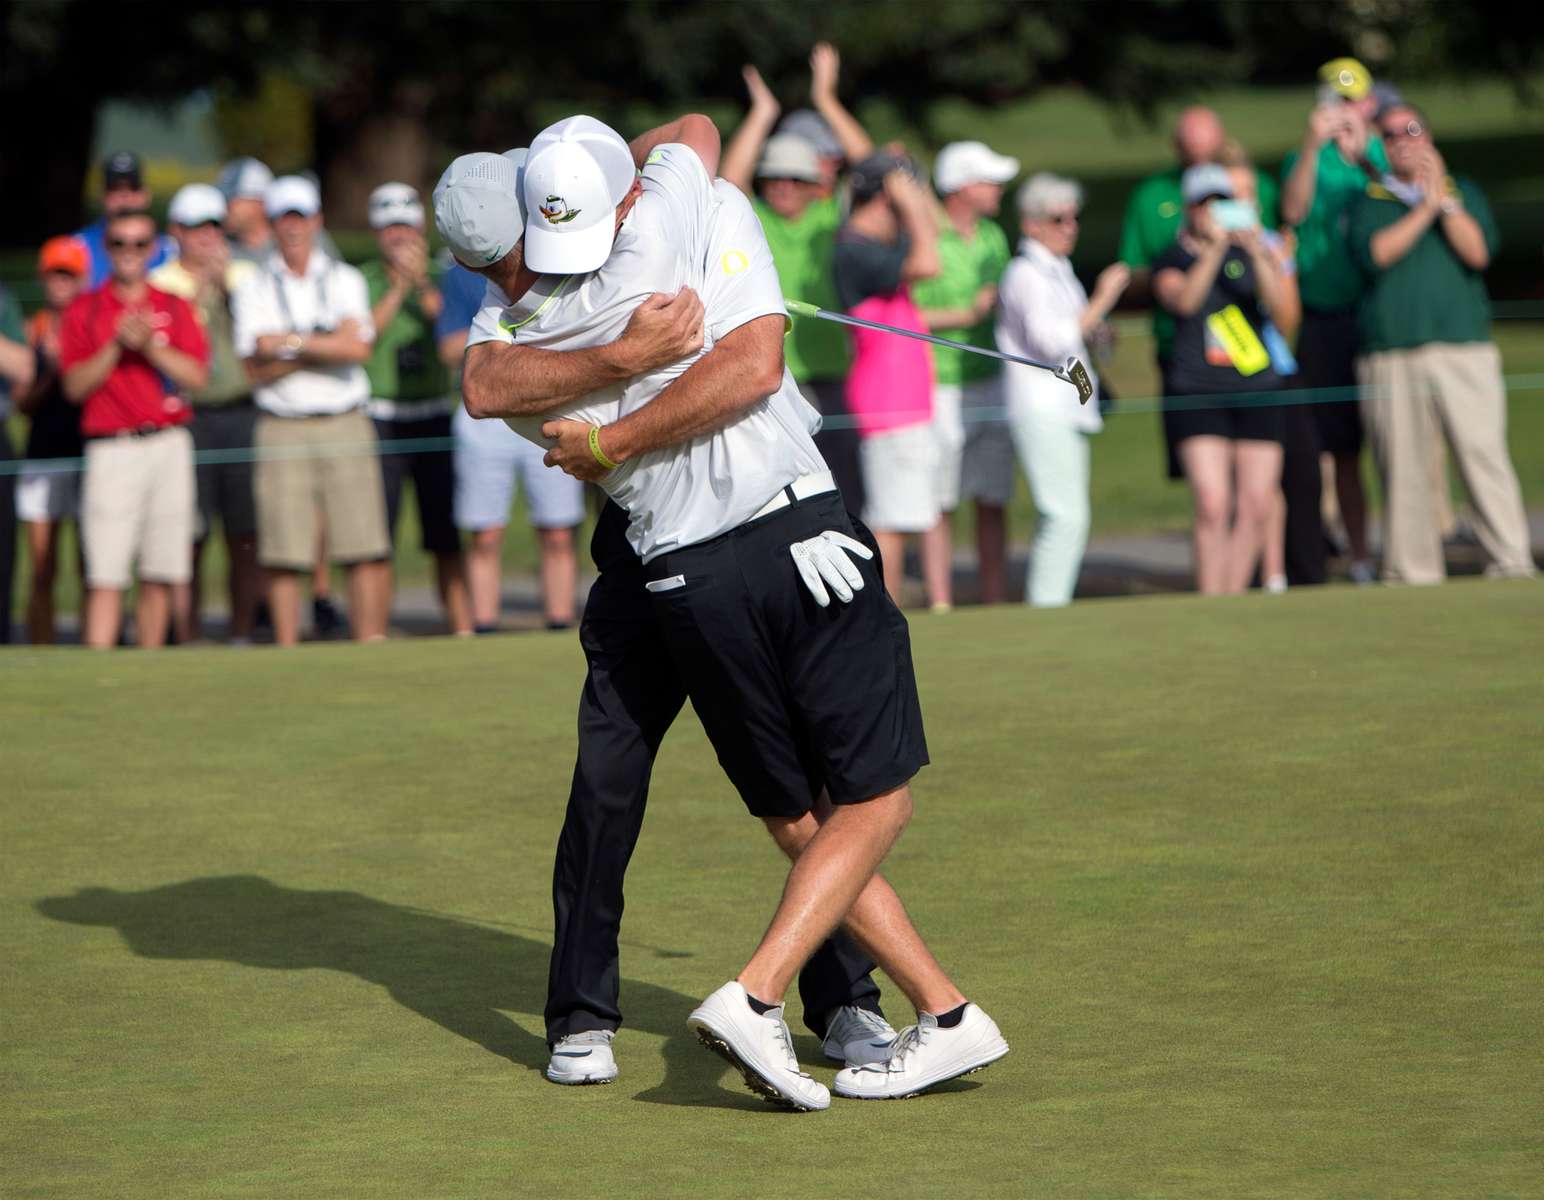 Oregon head coach Casey Martin celebrates with golfer  Sulman Raza after Raza made the match winning putt in his semifinal match against Illinois' Charlie Danielson to send the Ducks into the finals of the NCAA men's golf championship at Eugene Country Club in Eugene.